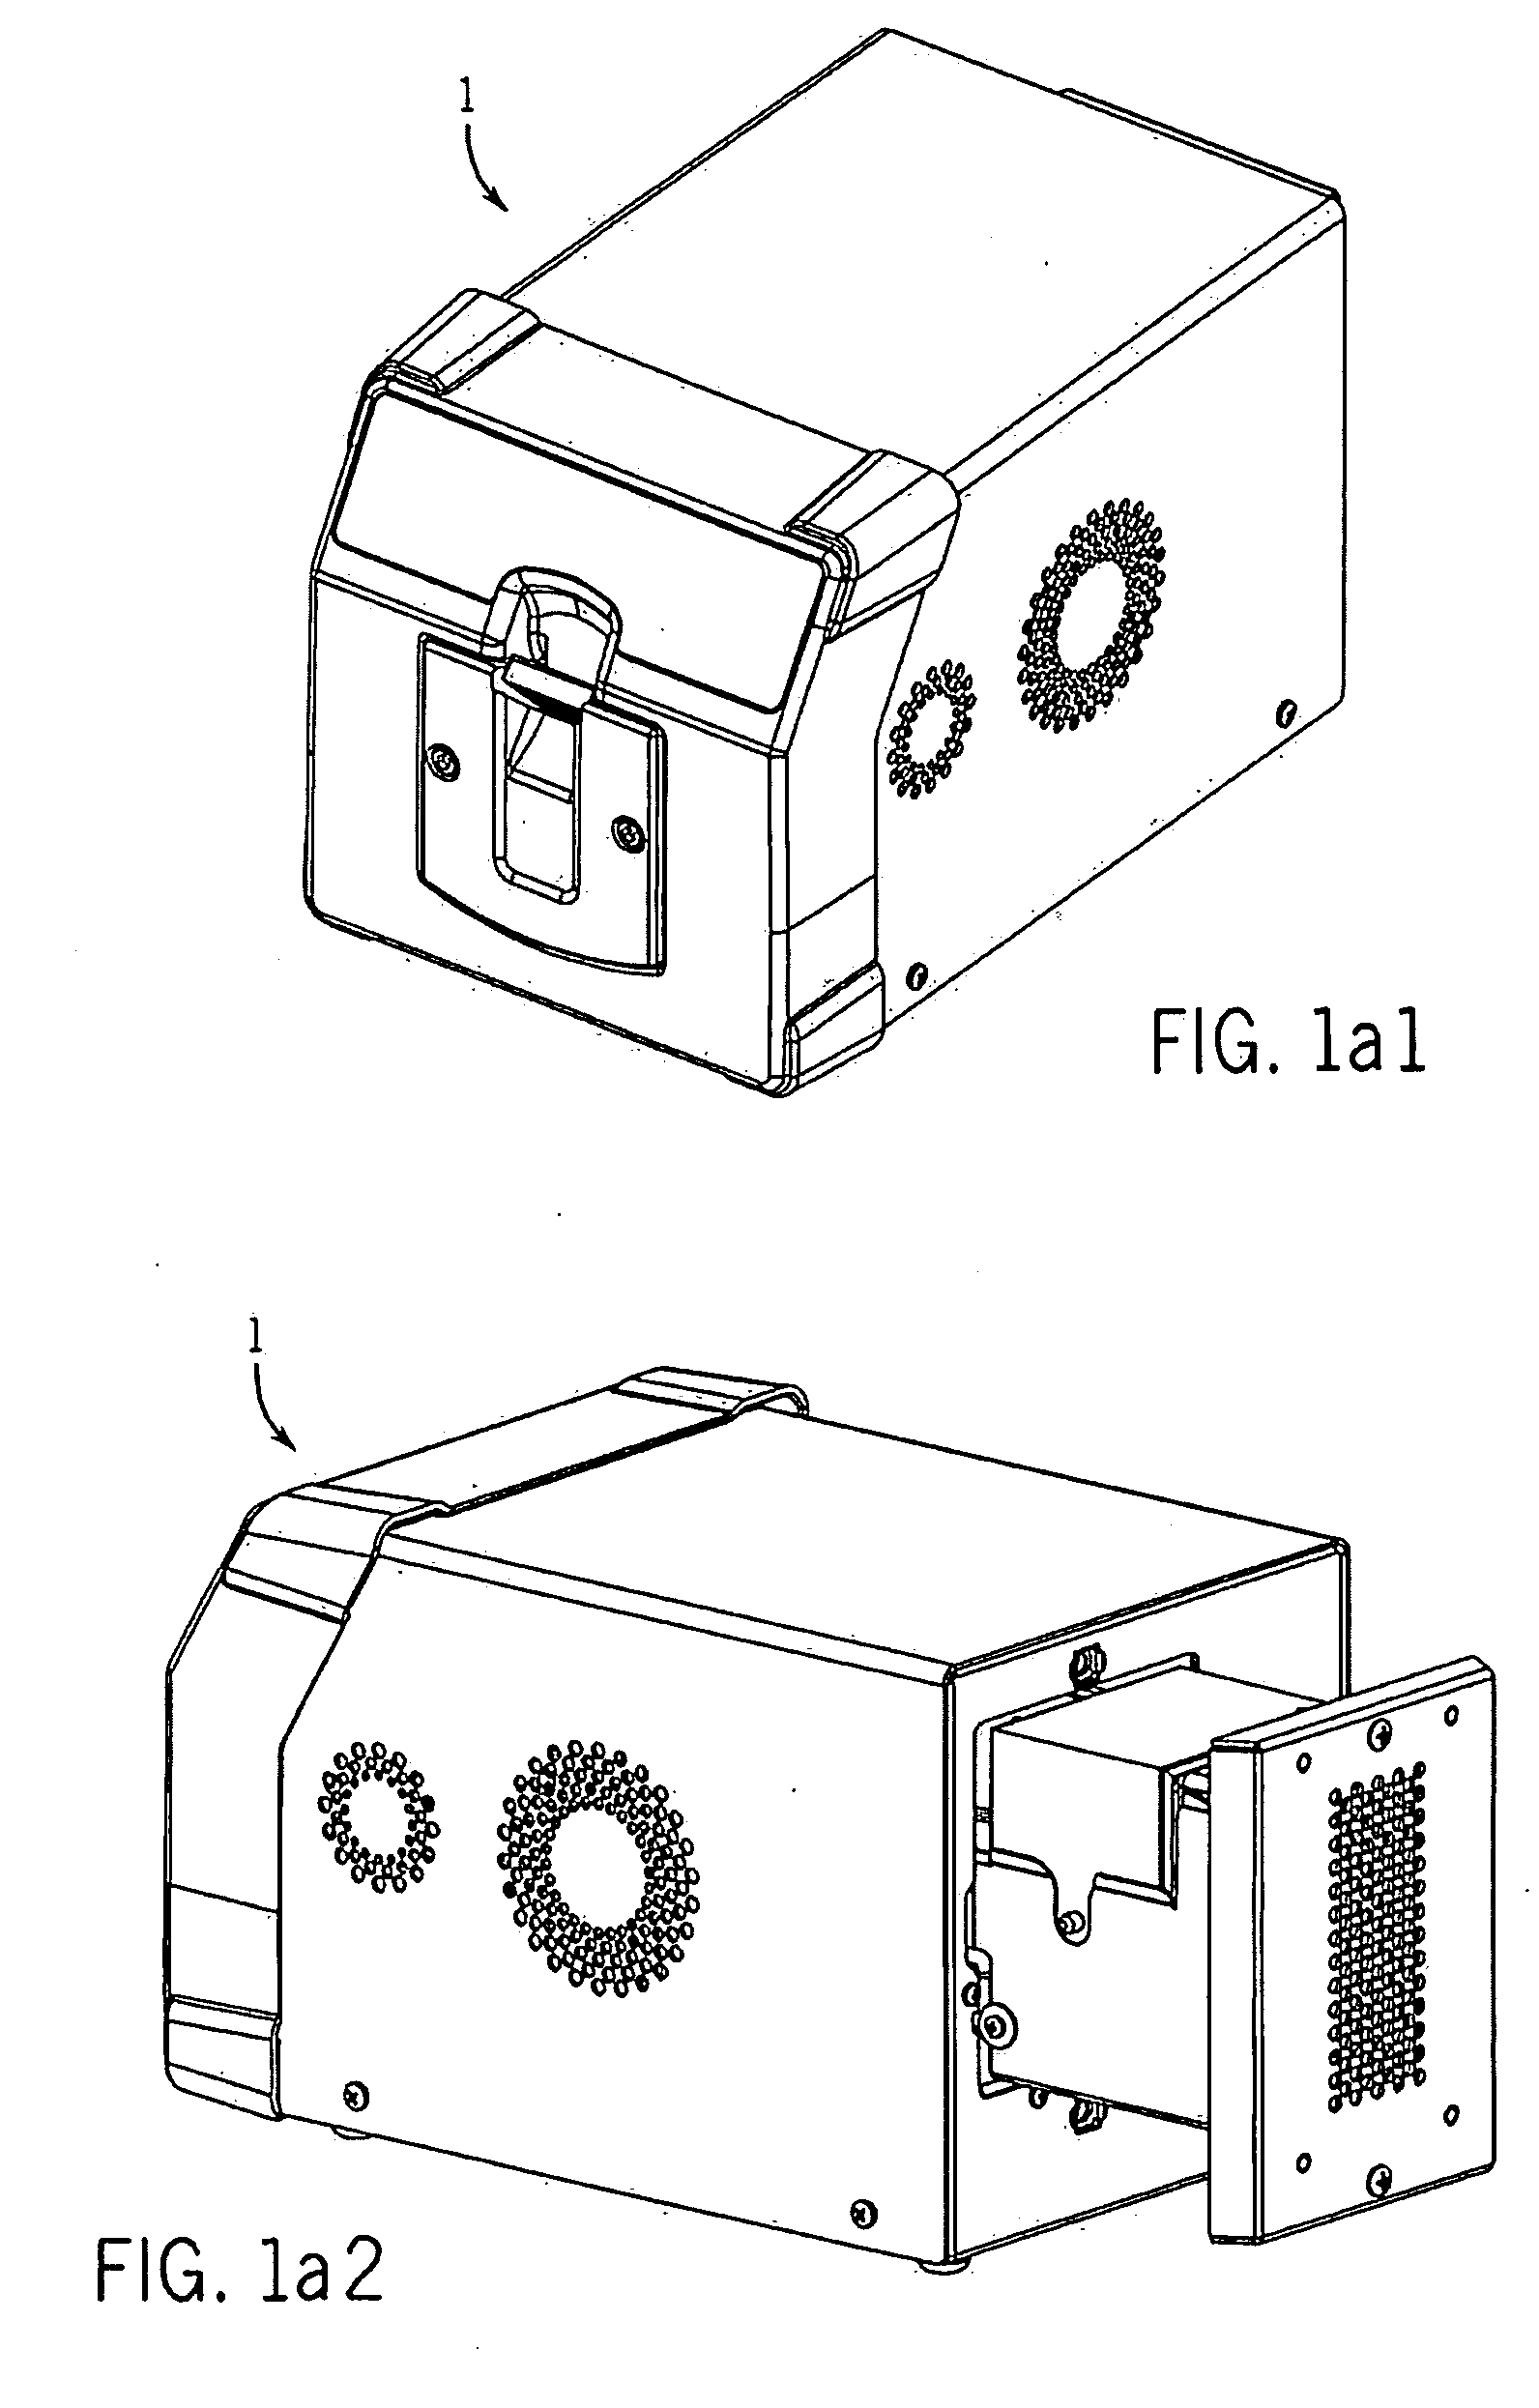 Device for Attaching a Label to a Substrate